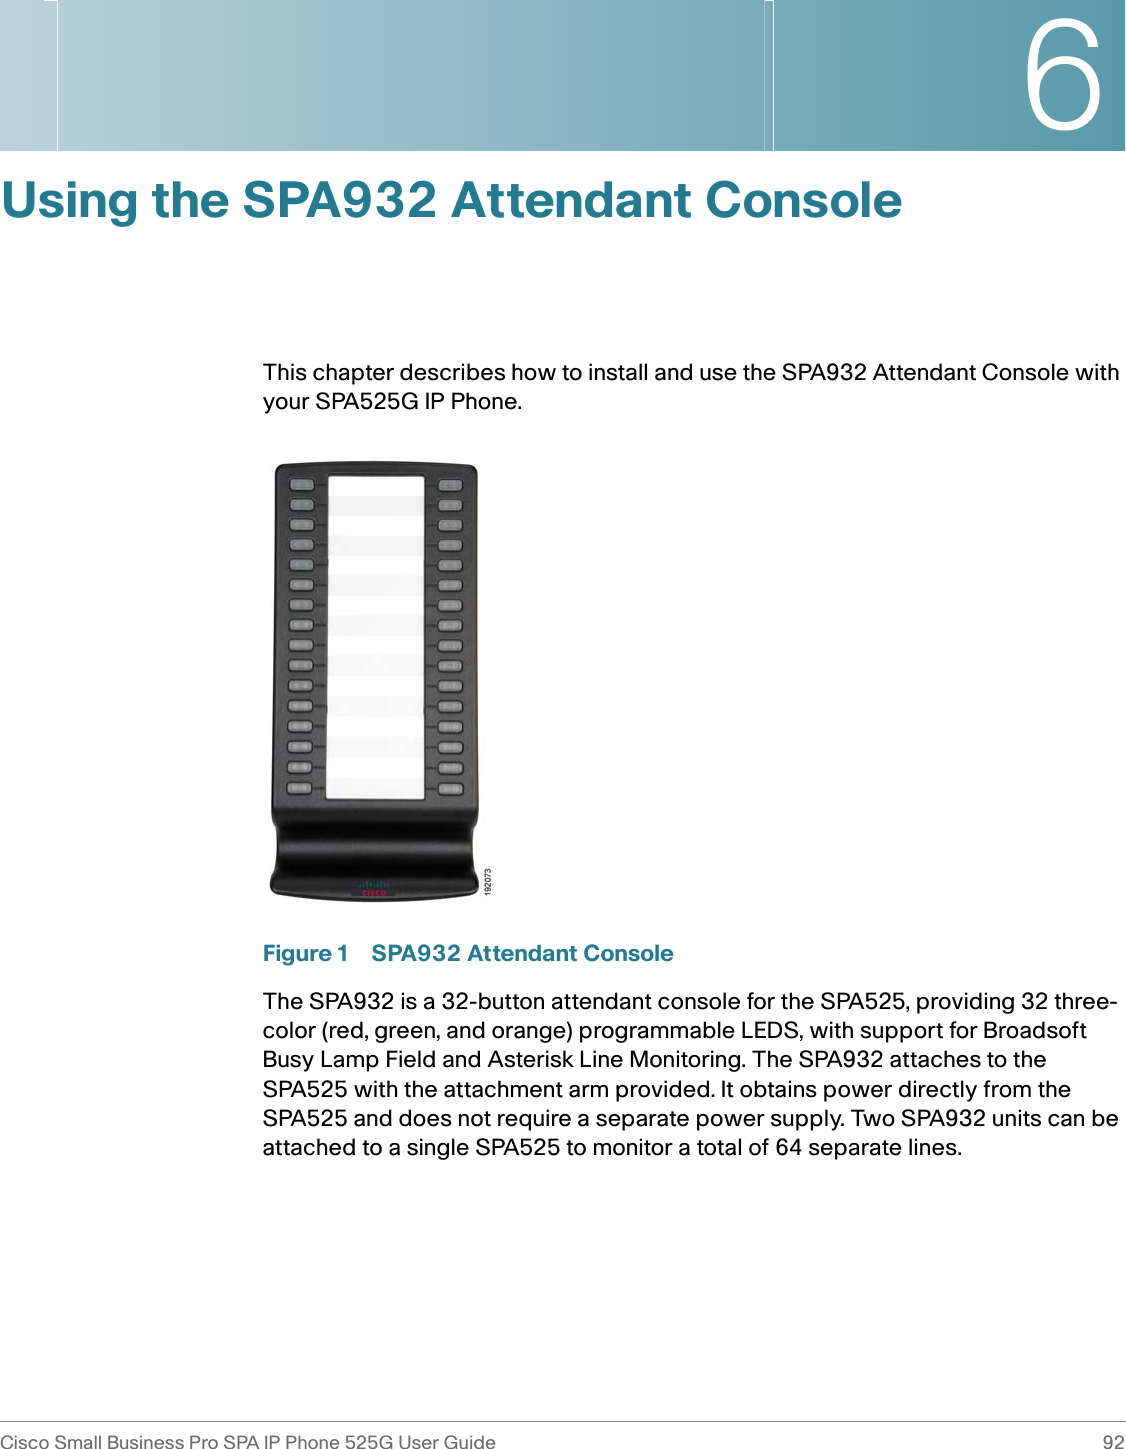 6Cisco Small Business Pro SPA IP Phone 525G User Guide 92 Using the SPA932 Attendant ConsoleThis chapter describes how to install and use the SPA932 Attendant Console with your SPA525G IP Phone.Figure 1 SPA932 Attendant ConsoleThe SPA932 is a 32-button attendant console for the SPA525, providing 32 three-color (red, green, and orange) programmable LEDS, with support for Broadsoft Busy Lamp Field and Asterisk Line Monitoring. The SPA932 attaches to the SPA525 with the attachment arm provided. It obtains power directly from the SPA525 and does not require a separate power supply. Two SPA932 units can be attached to a single SPA525 to monitor a total of 64 separate lines.